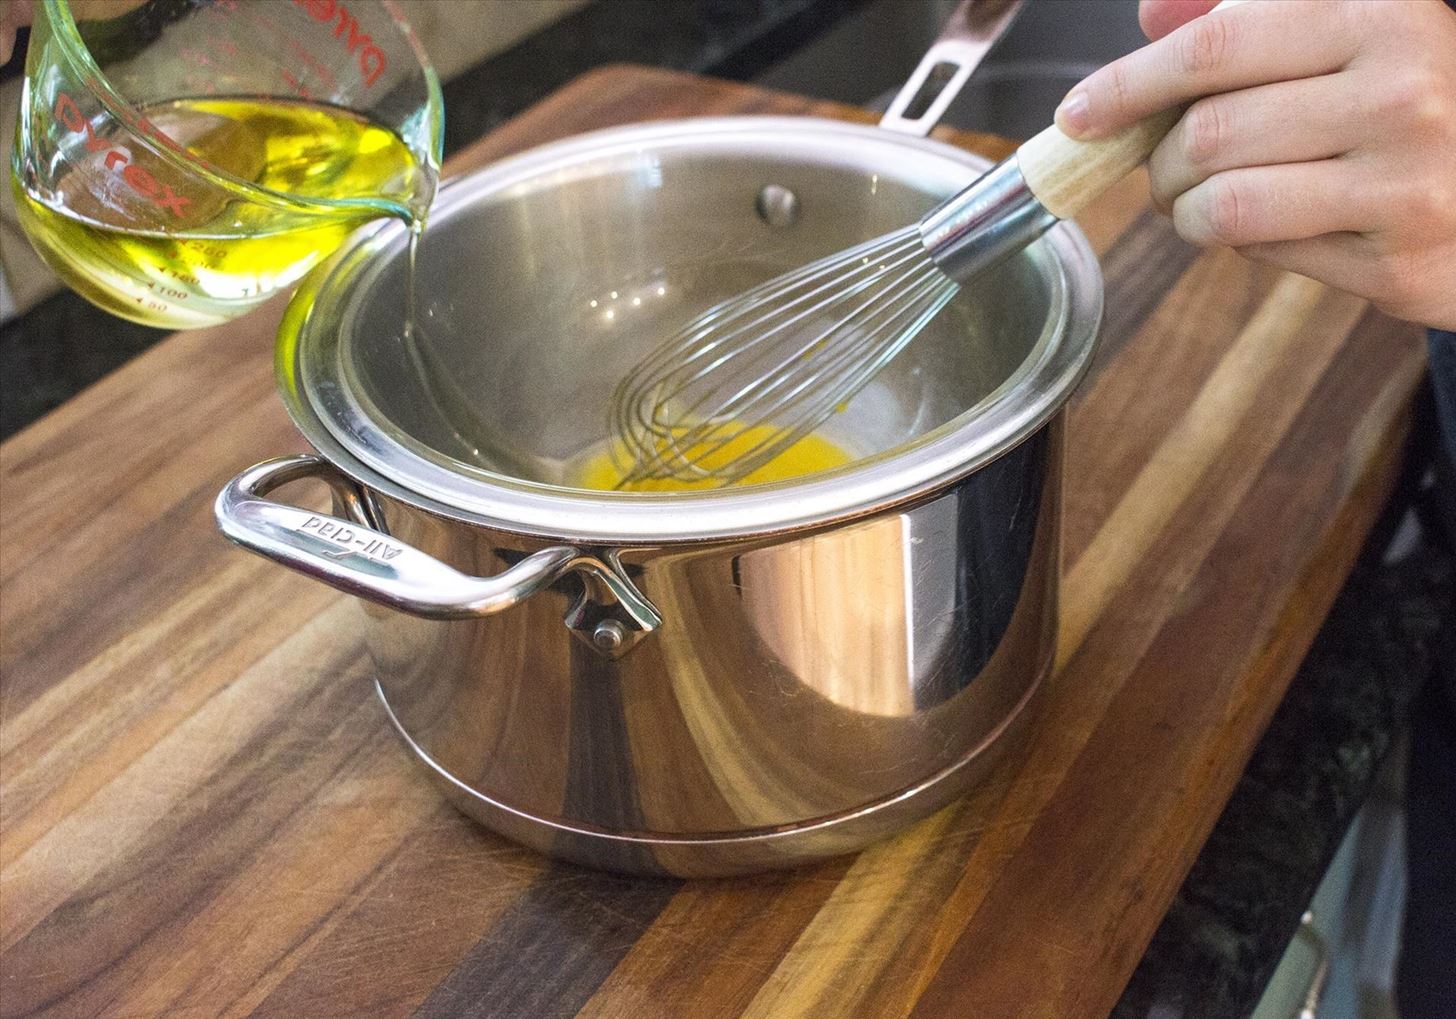 How to Keep Your Bowl from Slipping When Mixing Ingredients